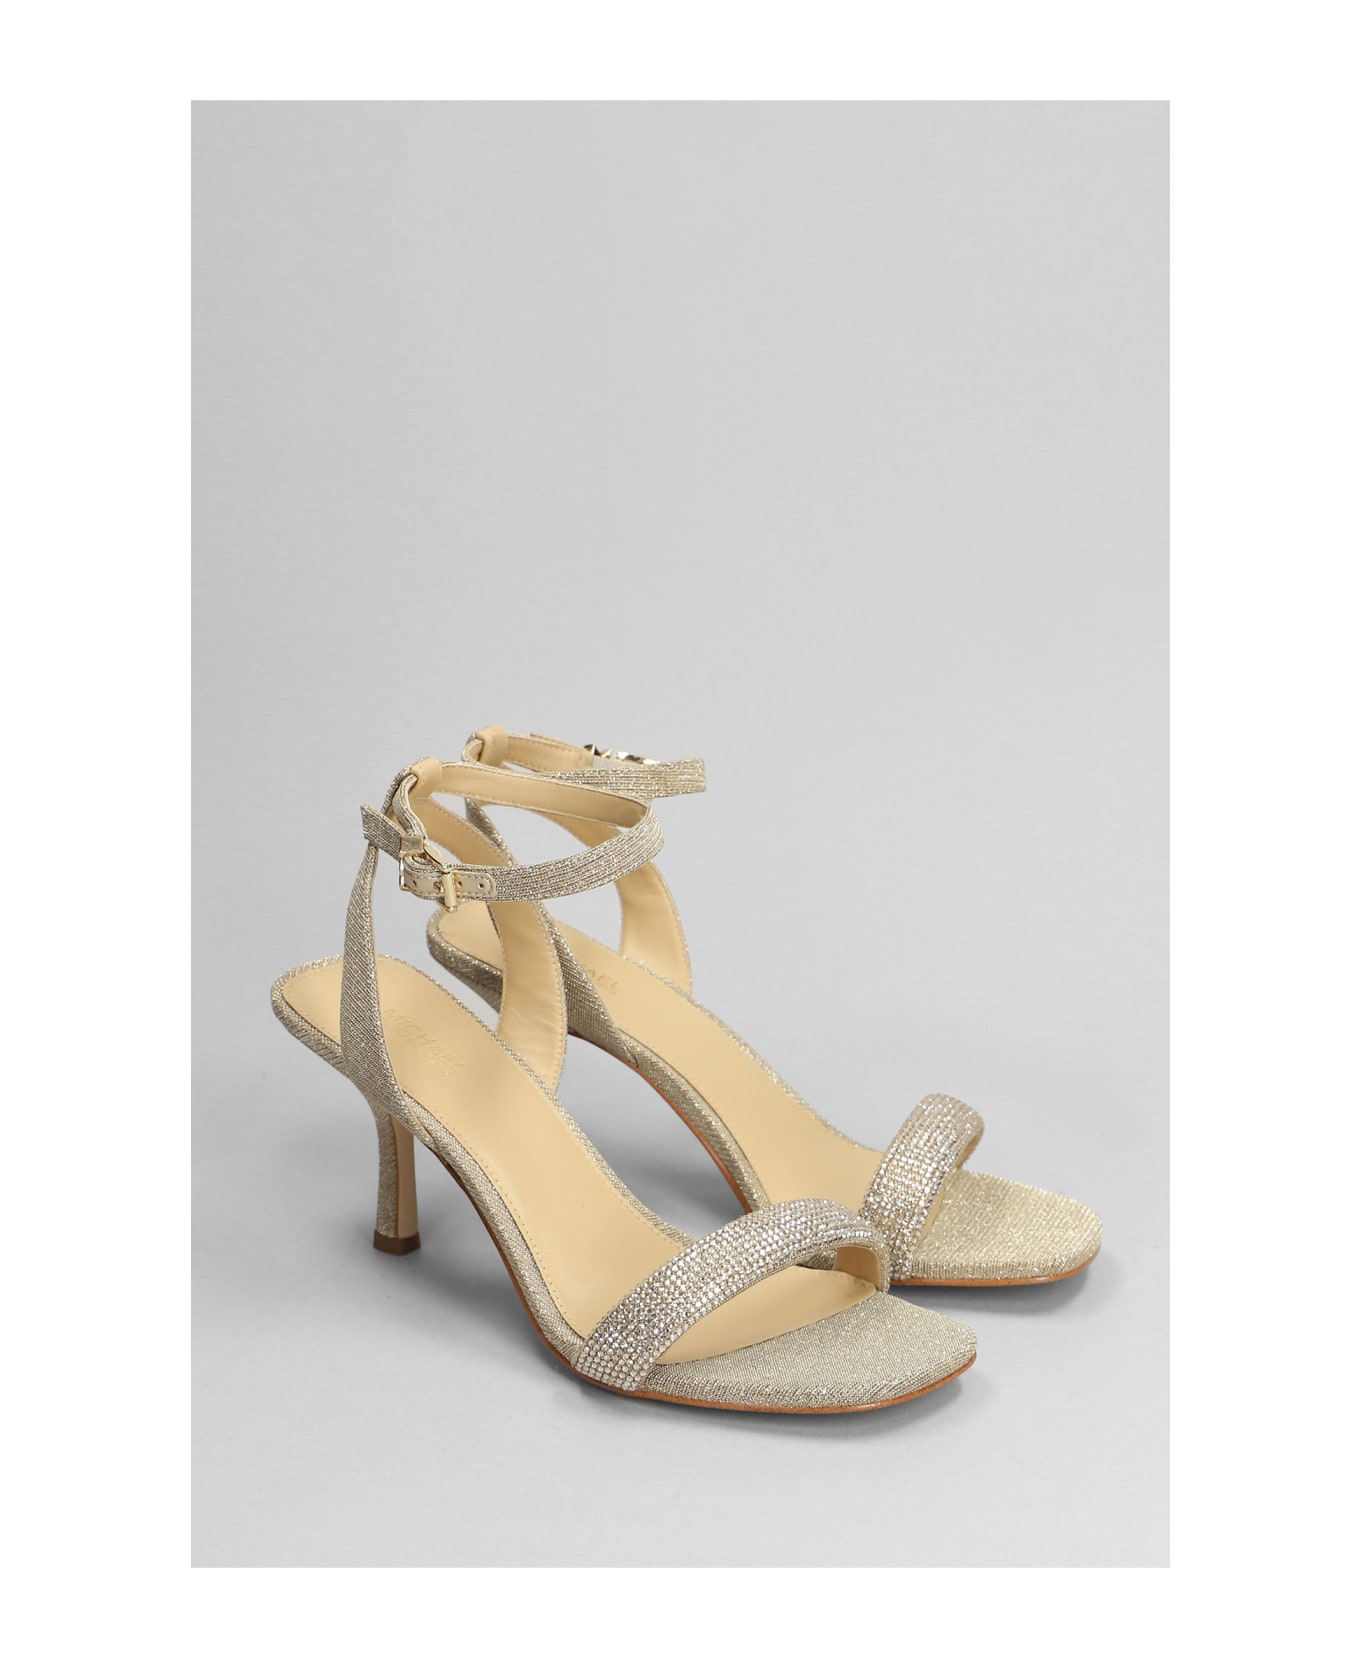 Michael Kors Carrie Sandals In Gold Glitter - gold サンダル